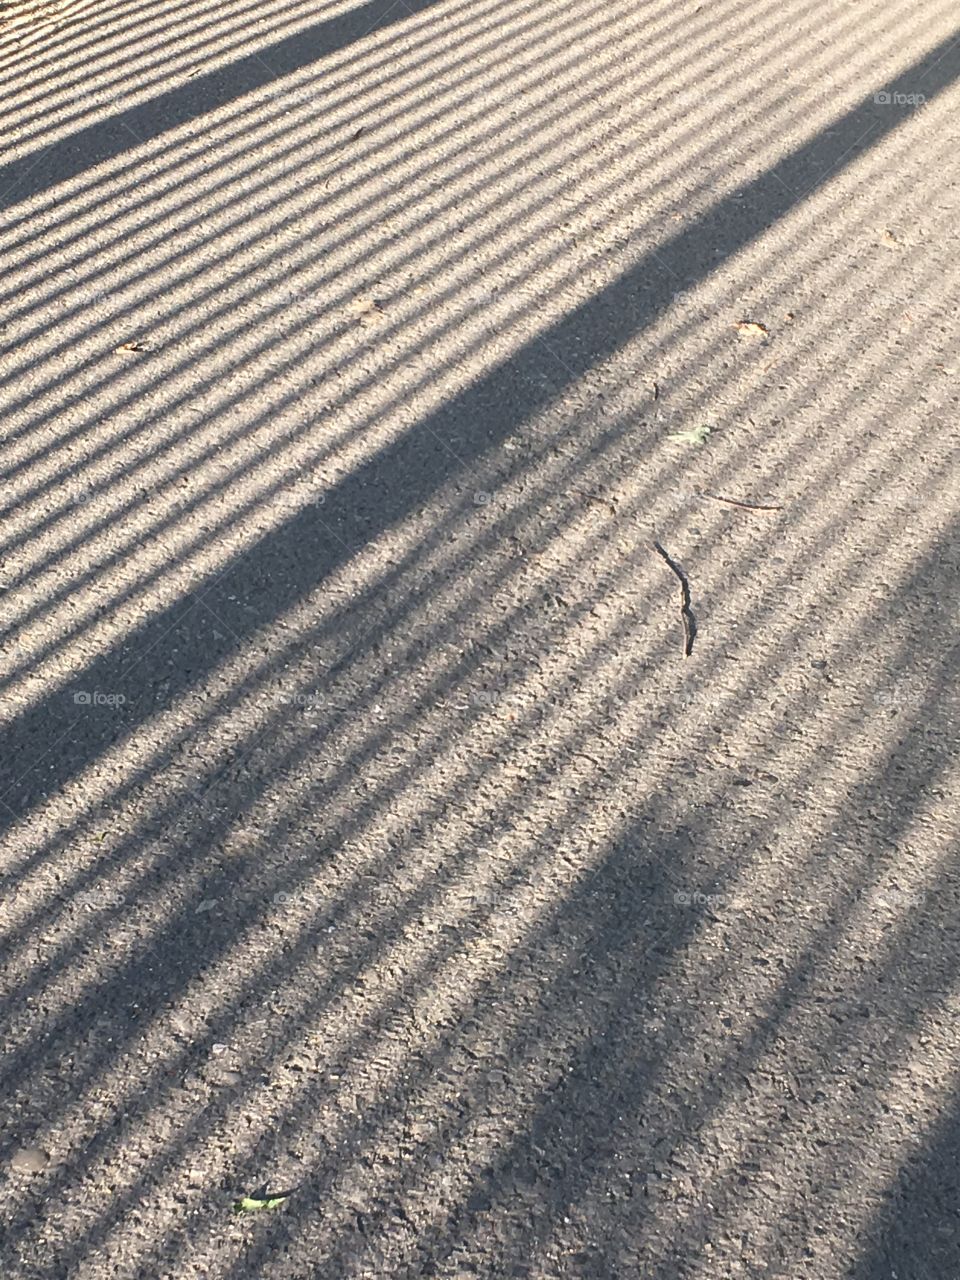 Shadow lines